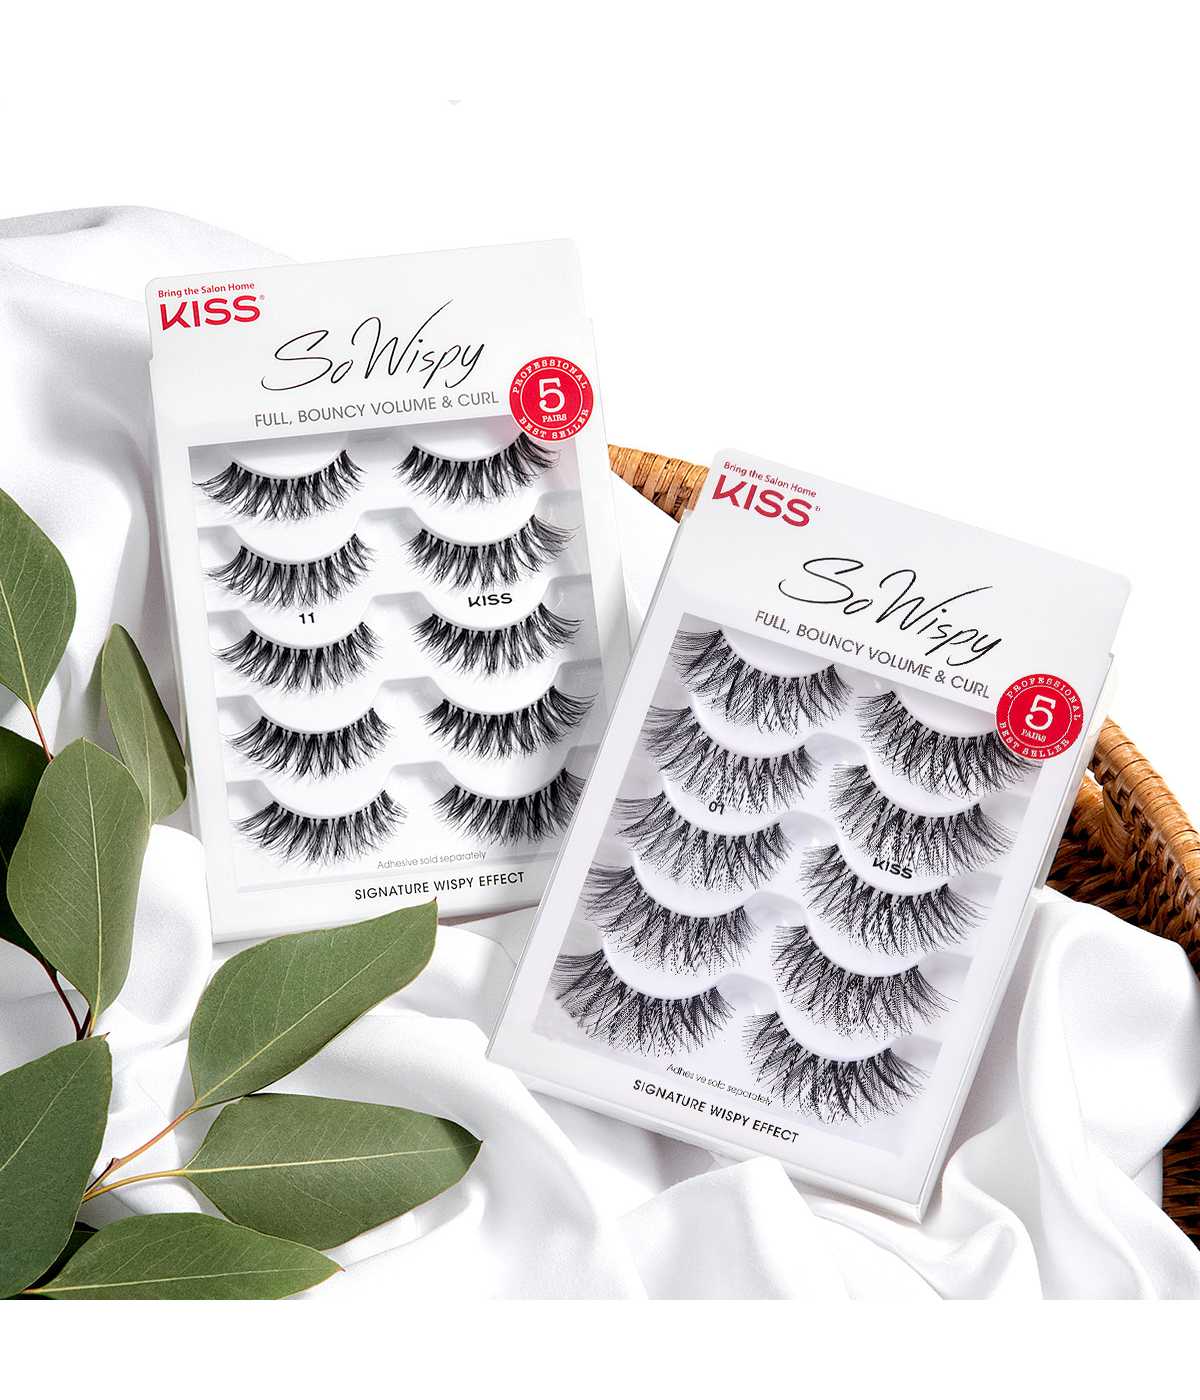 KISS So Wispy Lashes; image 7 of 7